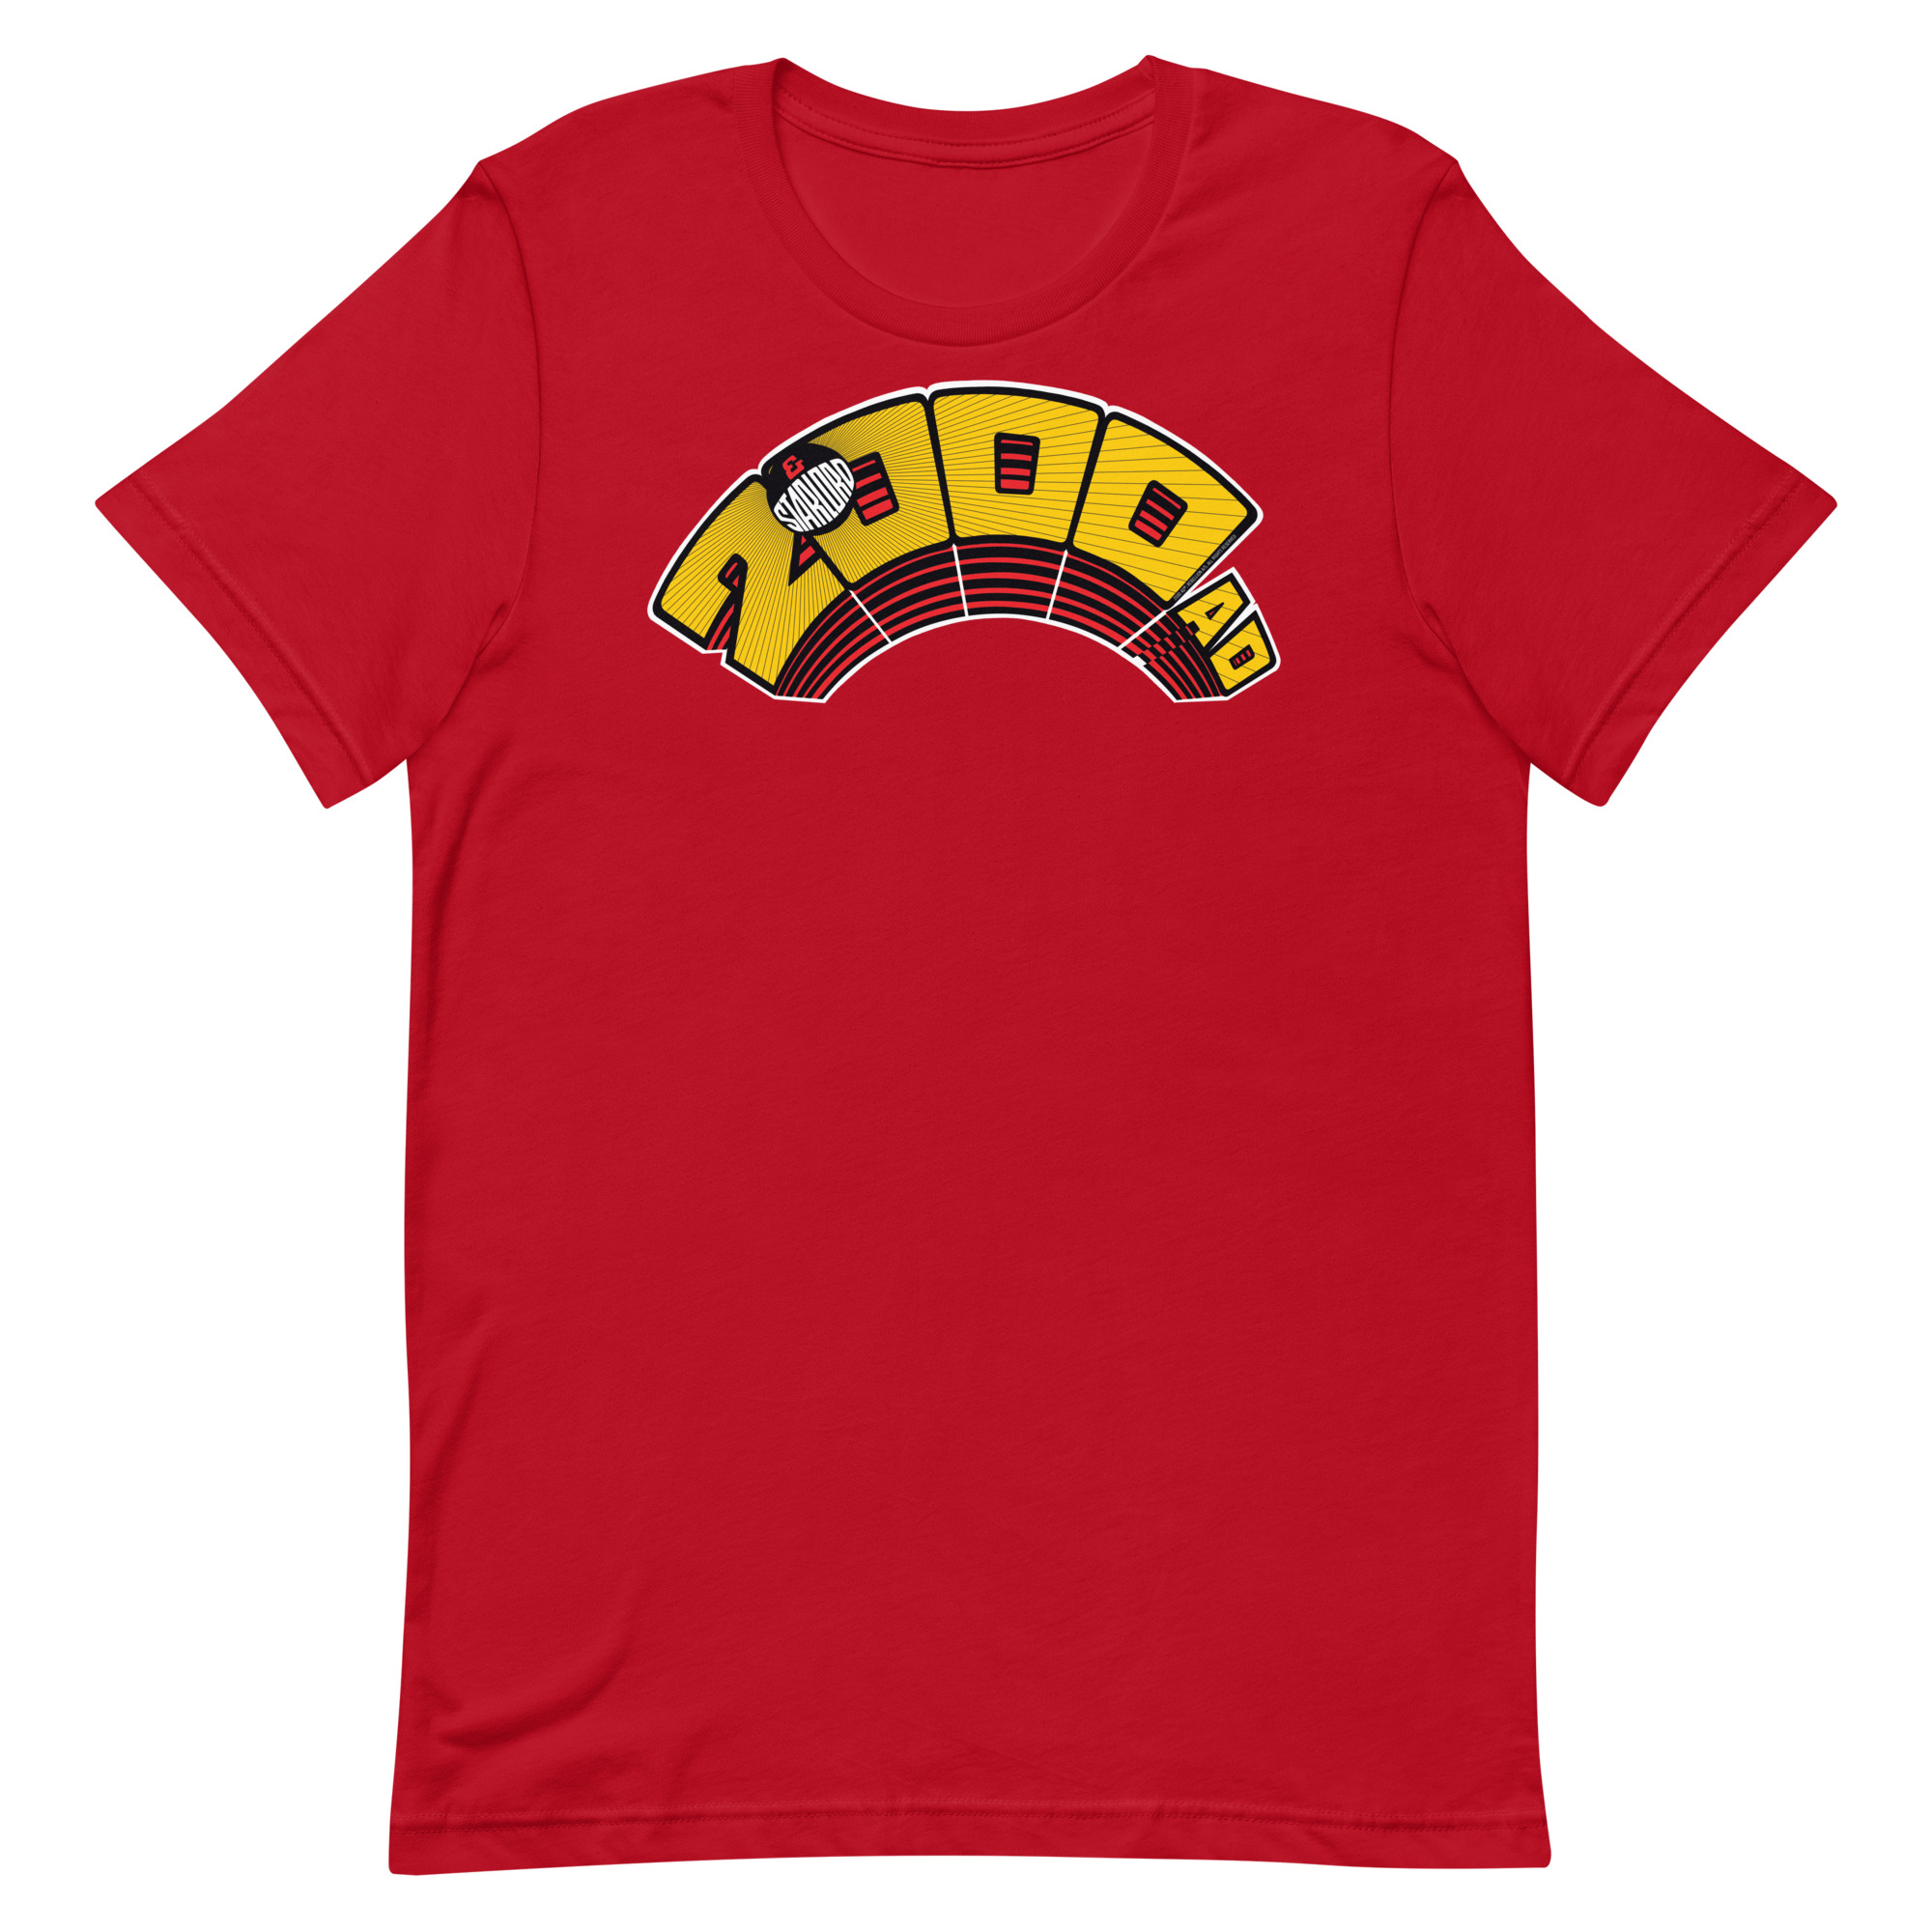 Image of a Red coloured 2000AD Starlord Arch t-shirt featuring a large 2000AD Starlord Arch logo in the middle